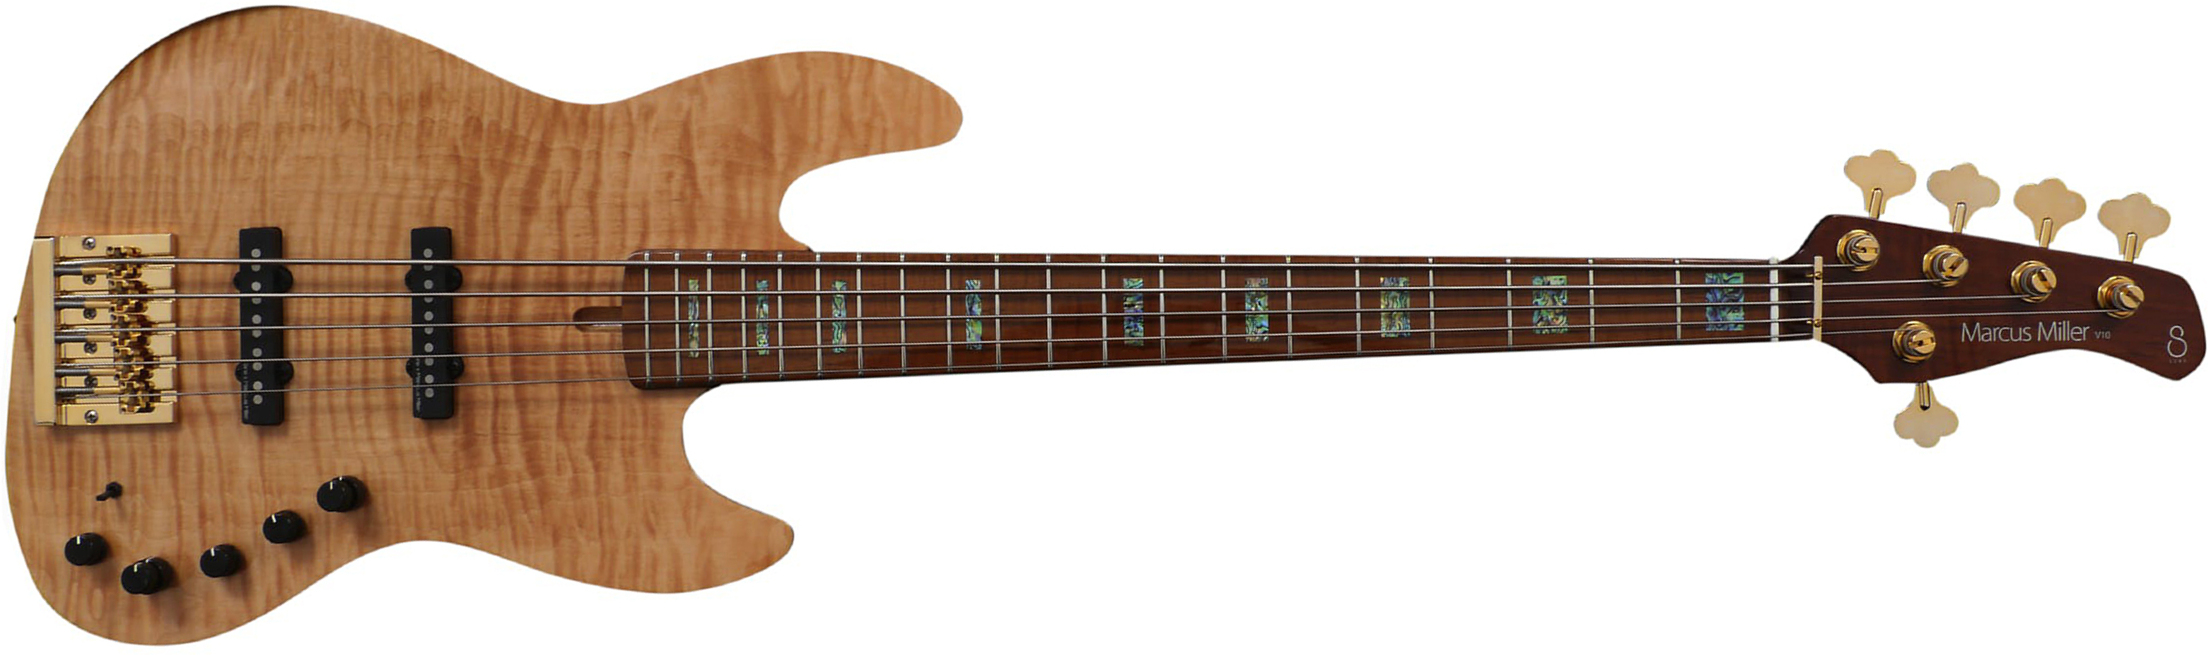 Marcus Miller V10dx 5st 5c Active Mn - Natural - Solidbody E-bass - Main picture